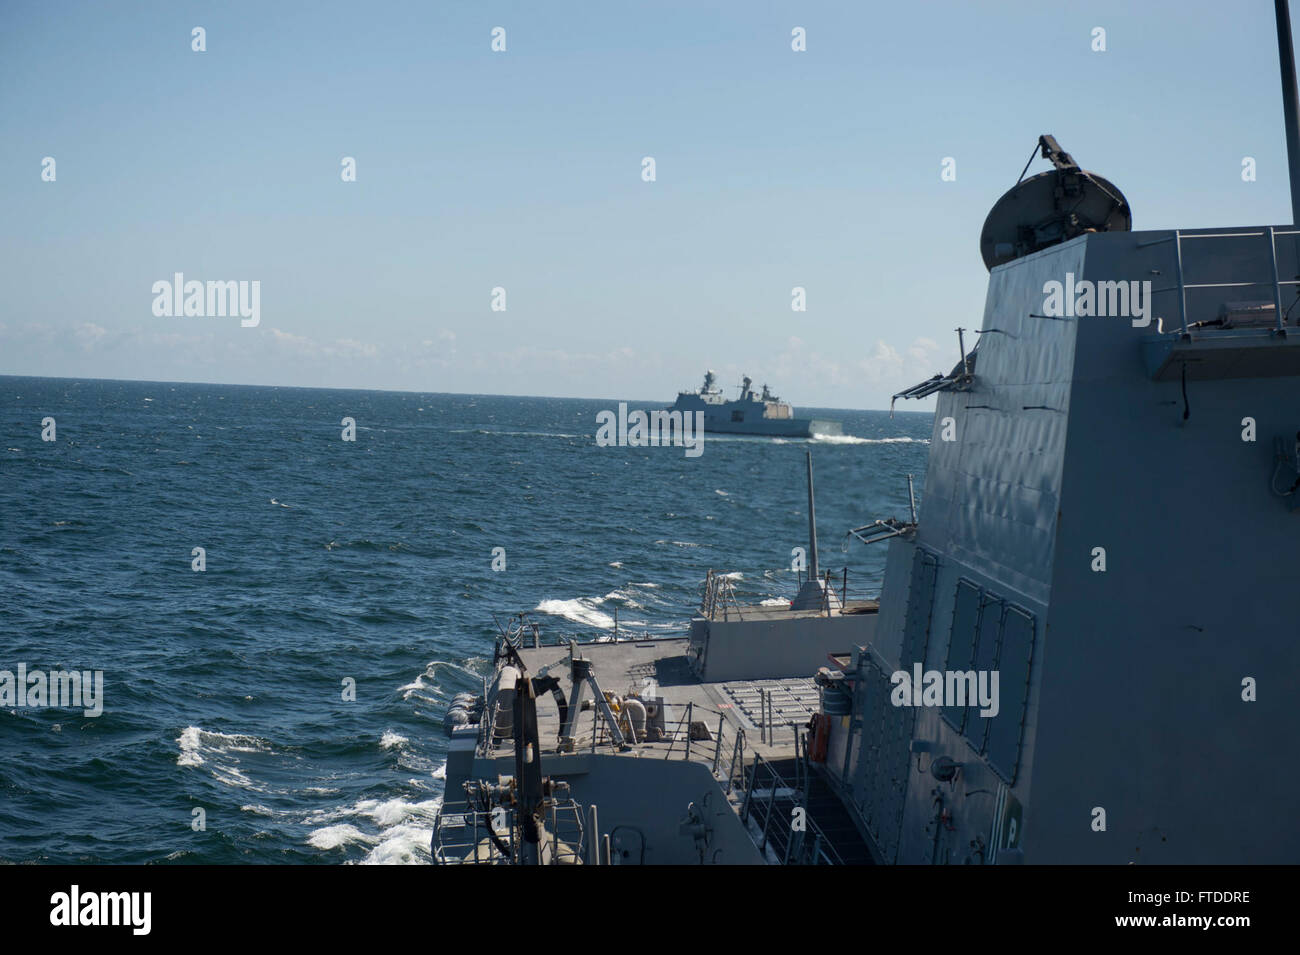 150615-N-ZE250-098 BALTIC SEA (June 15, 2015) Danish Navy Frigate HDMS Absalon (L16) maneuvers behind USS Jason Dunham (DDG 109) June 15, 2015. Jason Dunham, an Arleigh Burke-class guided-missile destroyer homeported in Norfolk, is participating in exercise Baltic Operations (BALTOPS) 2015. BALTOPS is an annually recurring multinational exercise designed to enhance flexibility and interoperability, as well as demonstrate resolve of Allied and partner forces to defend the Baltic region. (U.S. Navy photo by Mass Communication Specialist 3rd Class Weston Jones/Released) Stock Photo